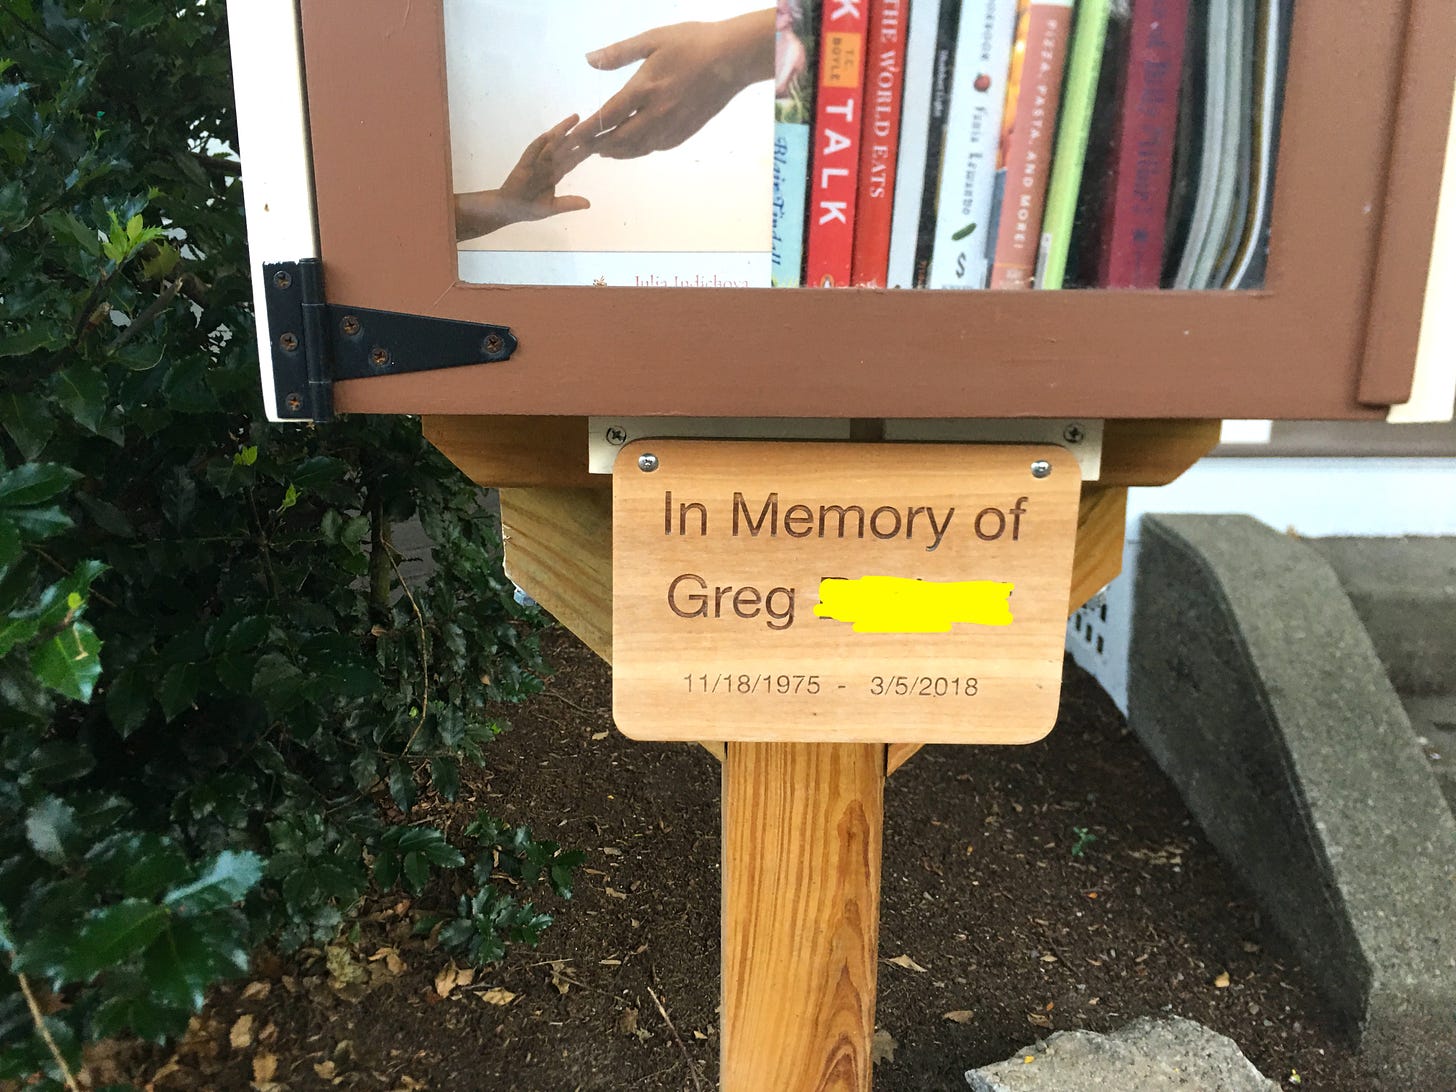 A Little Free Library made of wood features two jammed shelves of books, and a sign underneath that reads: In Memory of Greg, with his birth and death dates.